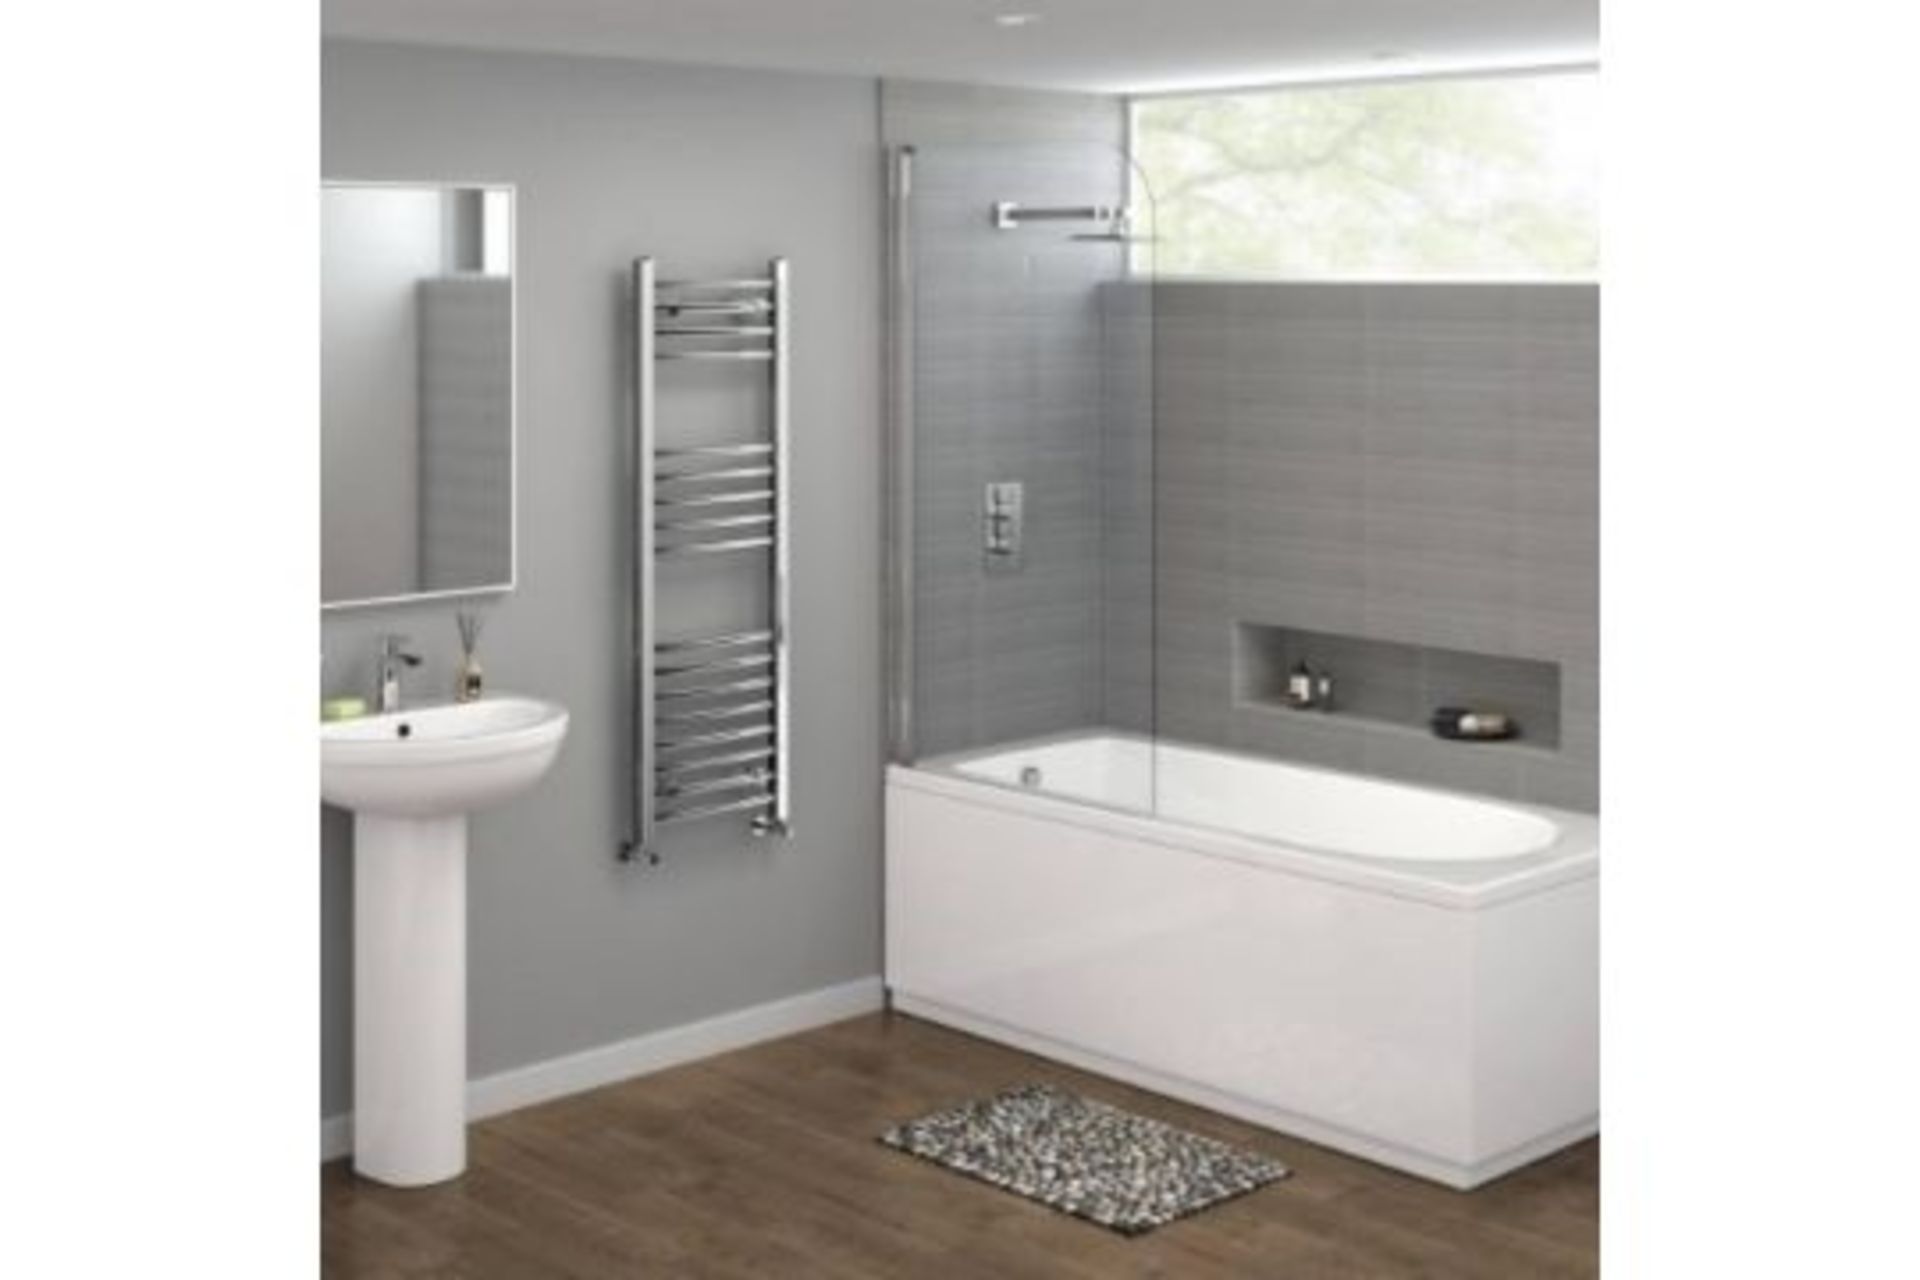 New 1200x400mm - 20mm Tubes - Chrome Curved Rail Ladder Towel Radiator. Nc1200400.Our Nancy - Image 2 of 2